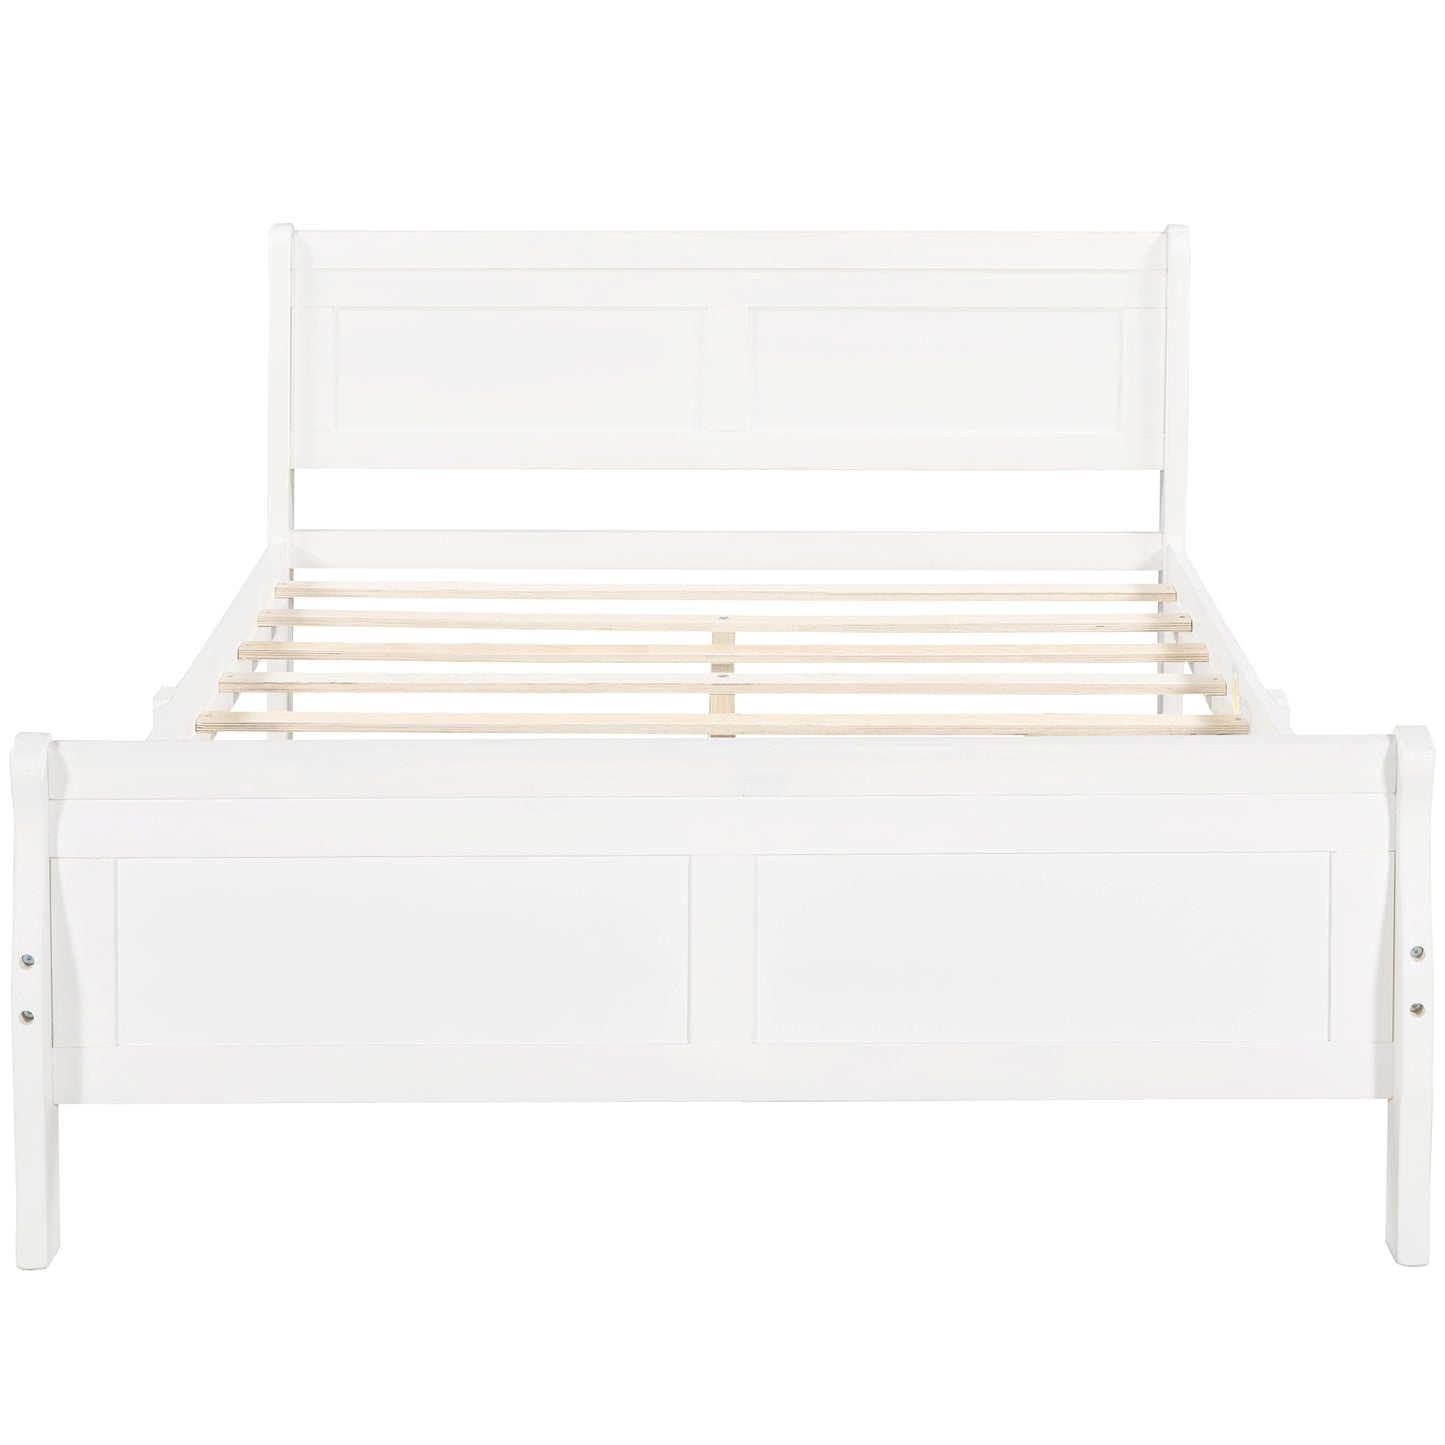 Queen Size Wood Platform Bed with Headboard and Wooden Slat Support (White)